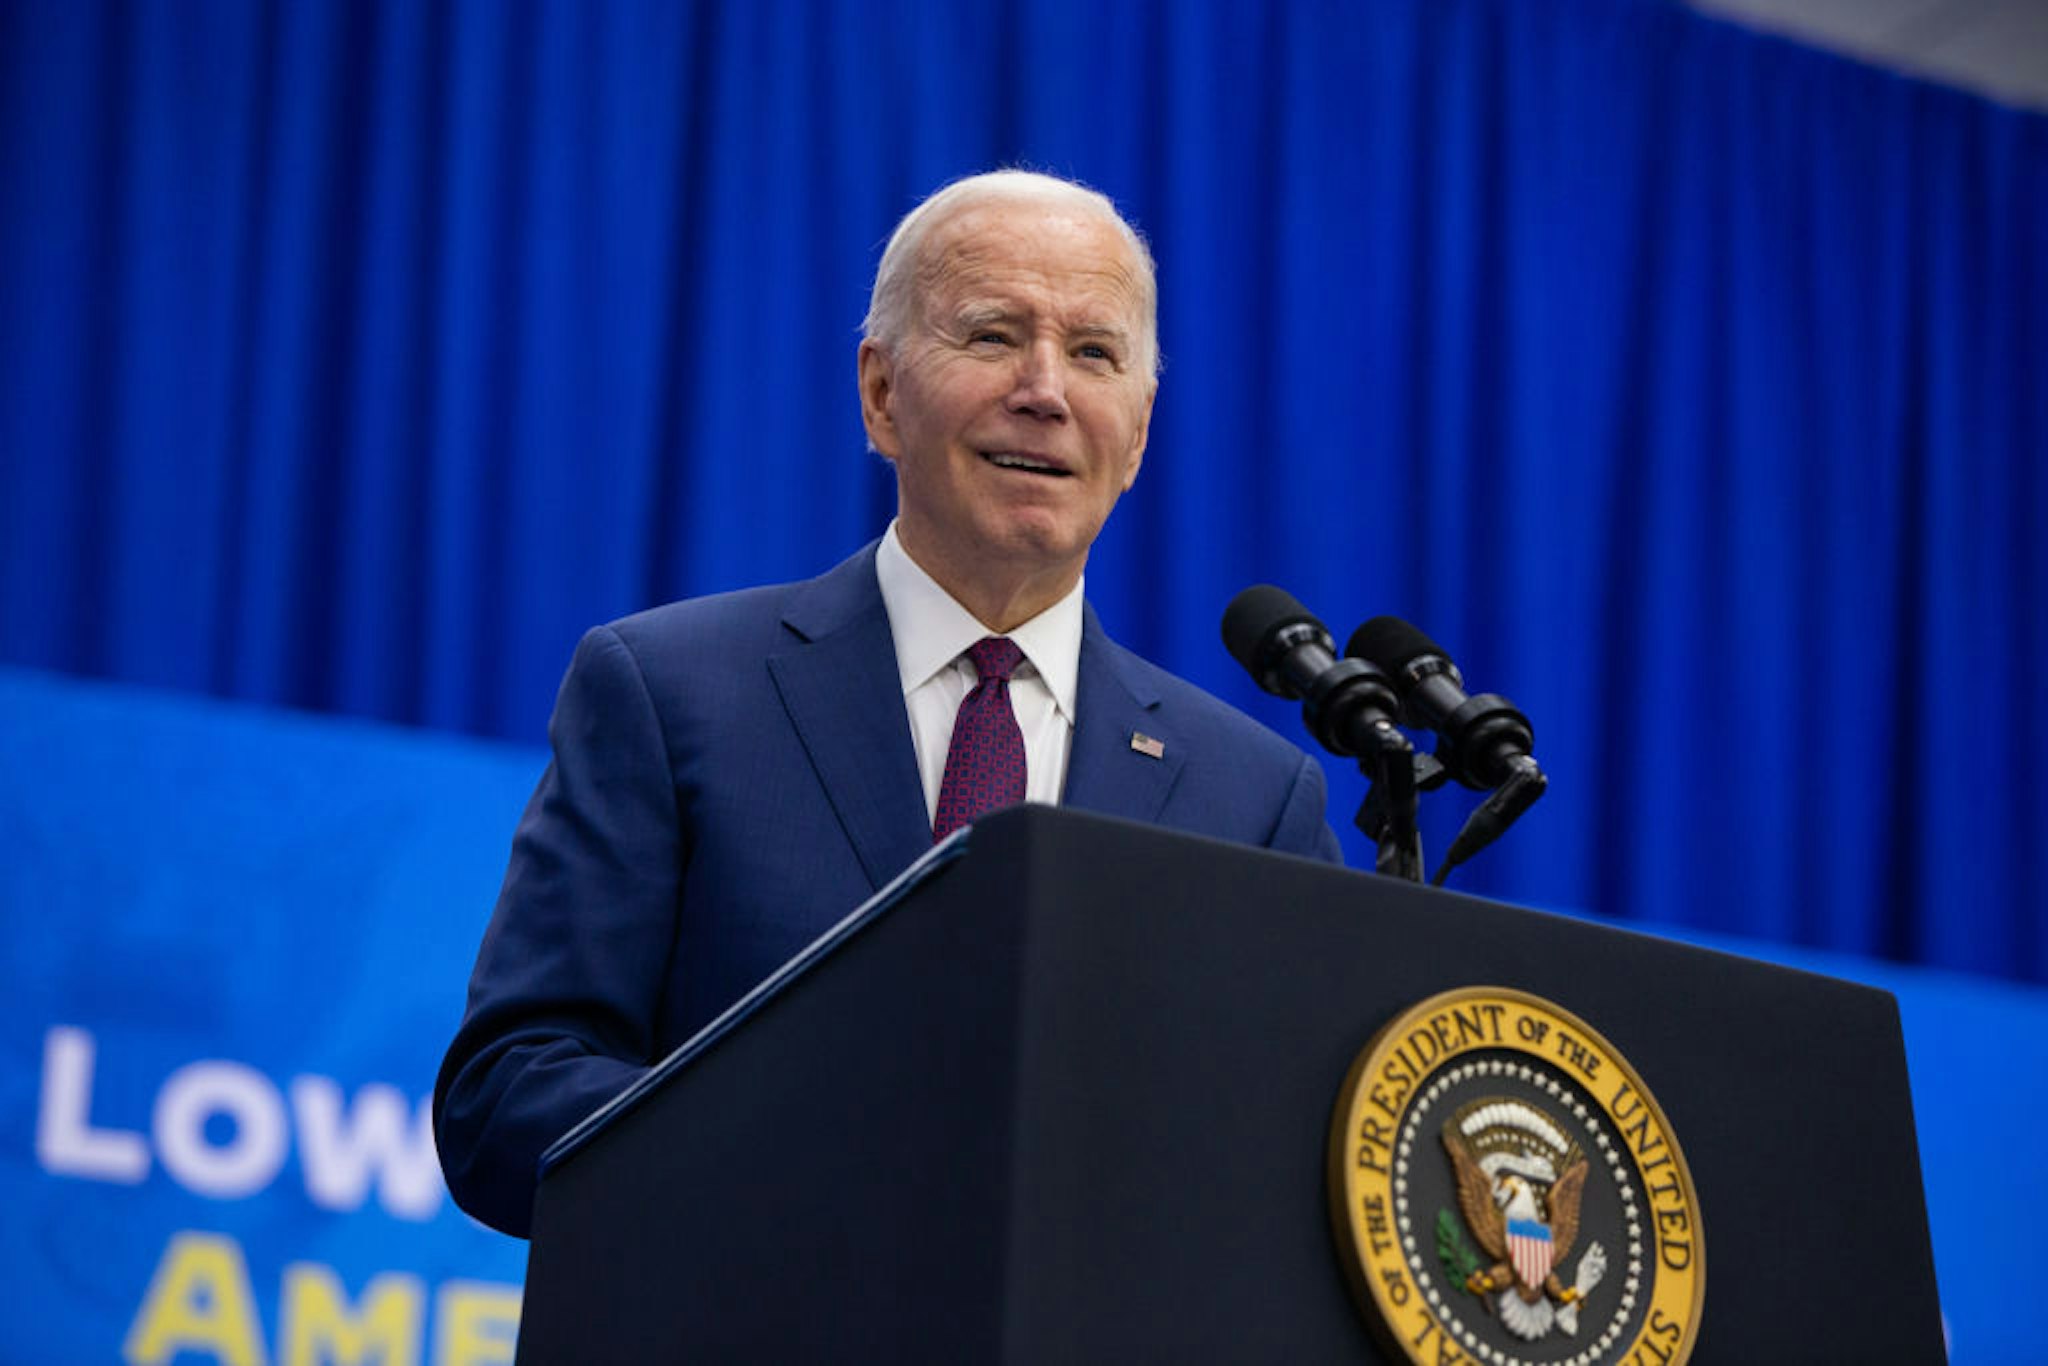 US President Joe Biden at the YMCA Allard Center in Goffstown, New Hampshire, US, on Monday, March 11, 2024. Biden's $7.3 trillion fiscal 2025 budget proposal, unveiled on Monday, lays out a second-term vision that would deliver more services, middle-class tax breaks and price controls to voters funded through higher taxes on the wealthy and corporations. Photographer: Jason Bergman/Bloomberg via Getty Images